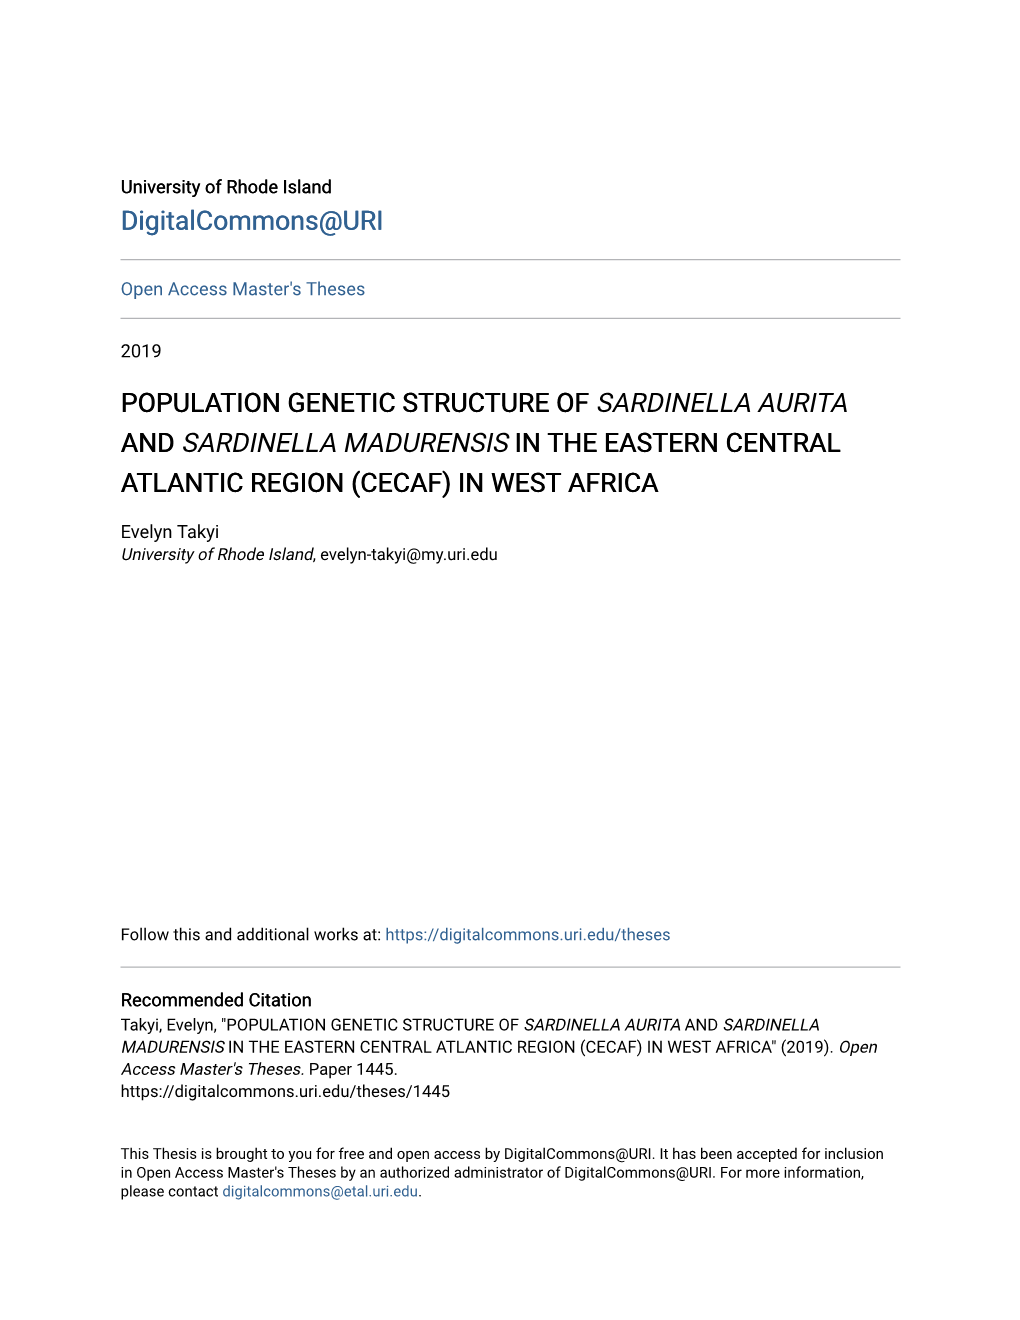 Population Genetic Structure of Sardinella Aurita and Sardinella Madurensis in the Eastern Central Atlantic Region (Cecaf) in West Africa